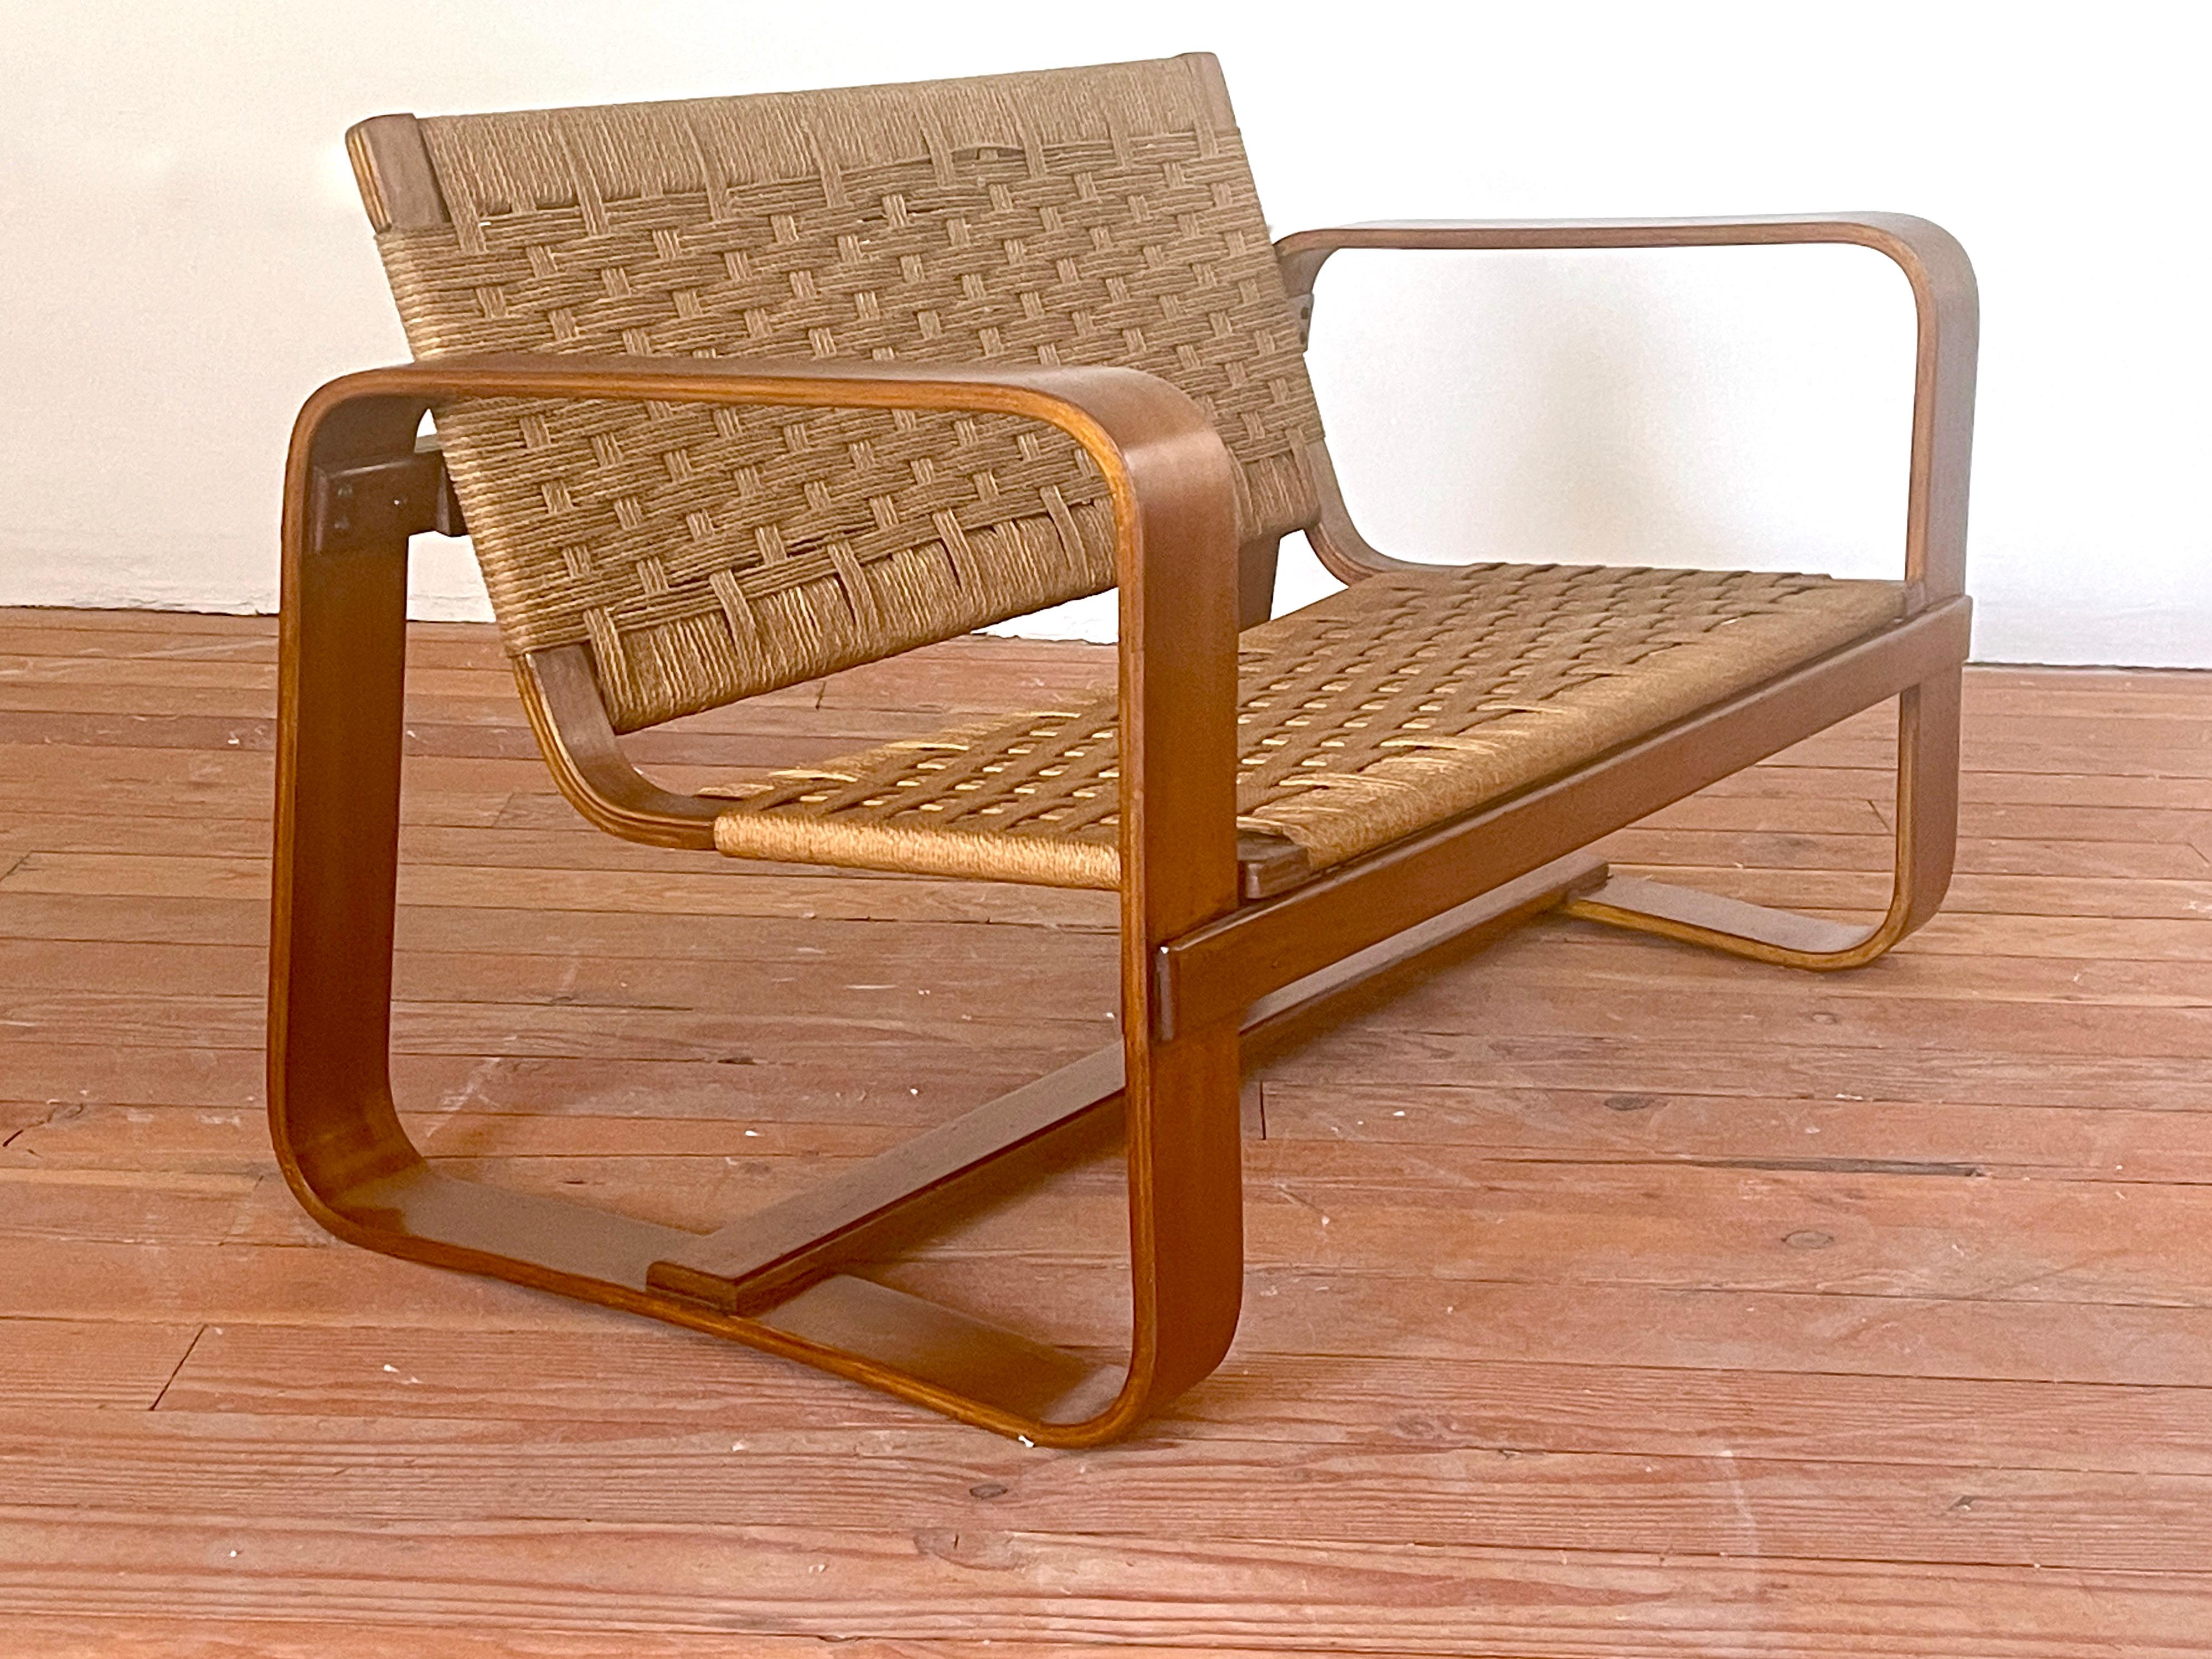 Bentwood Guiseppe Pagano Pogatschnig Bench, 1939 For Sale